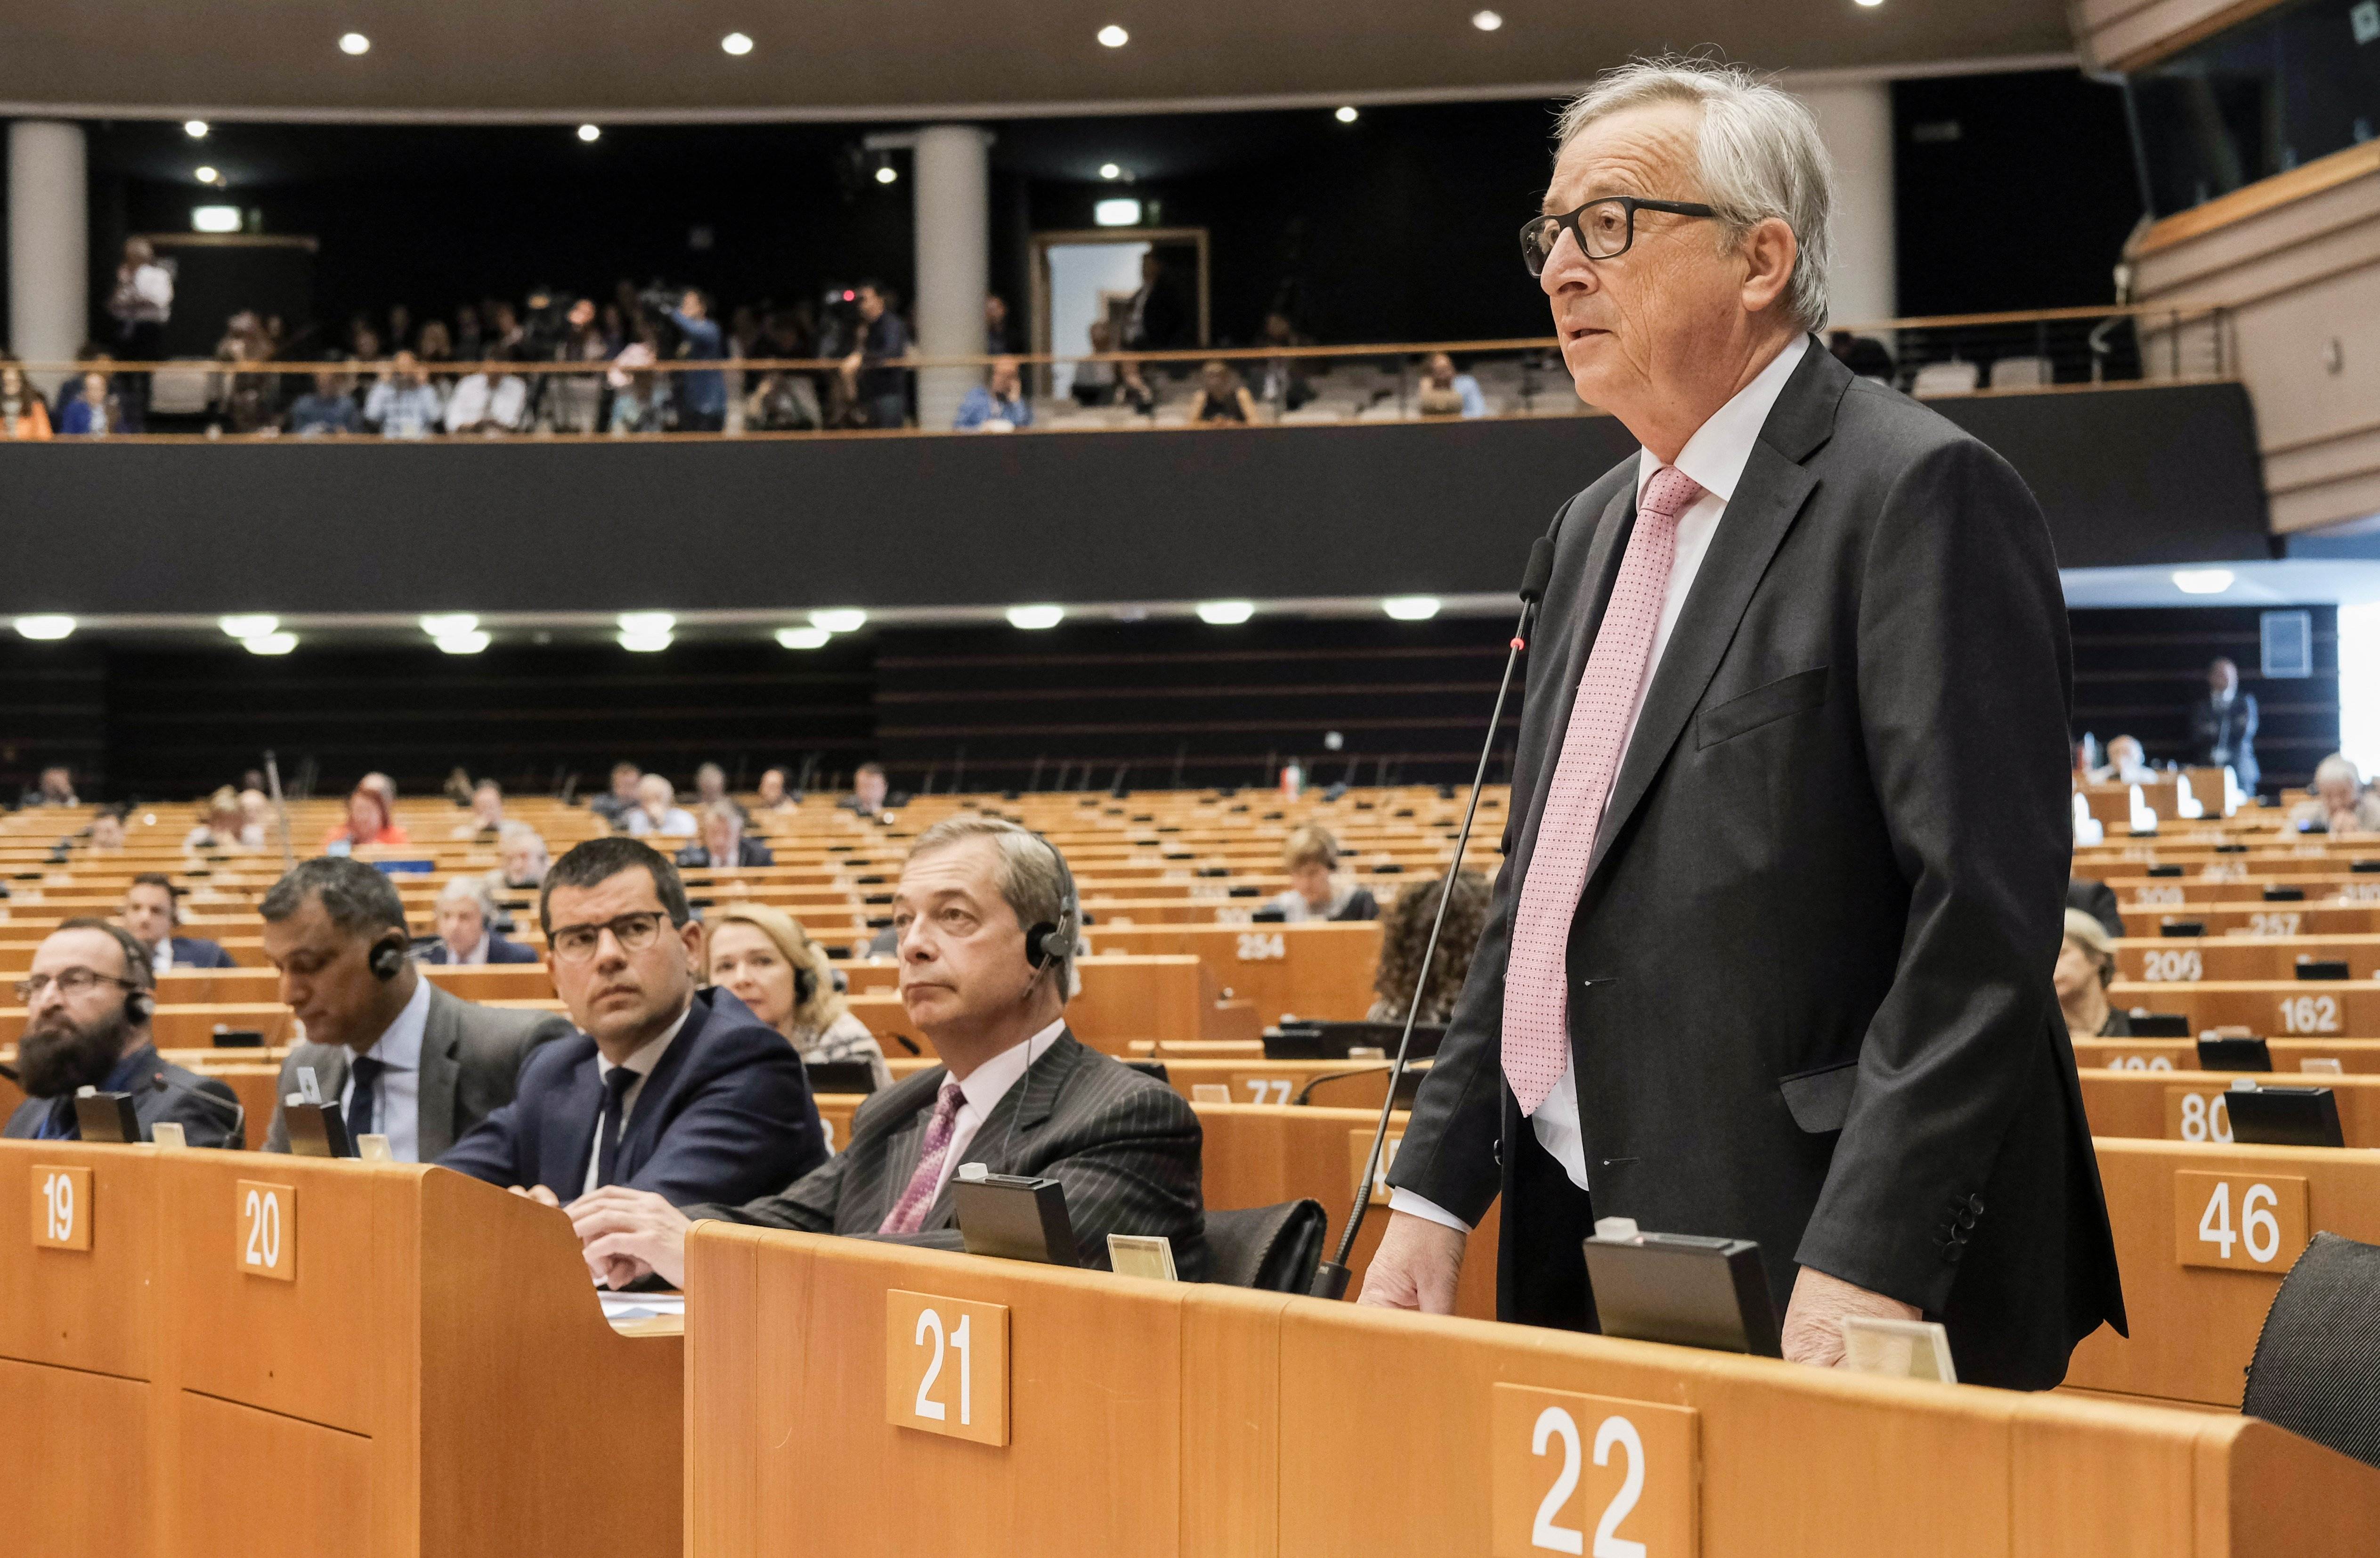 European Commission defends Juncker (and ends speculation)